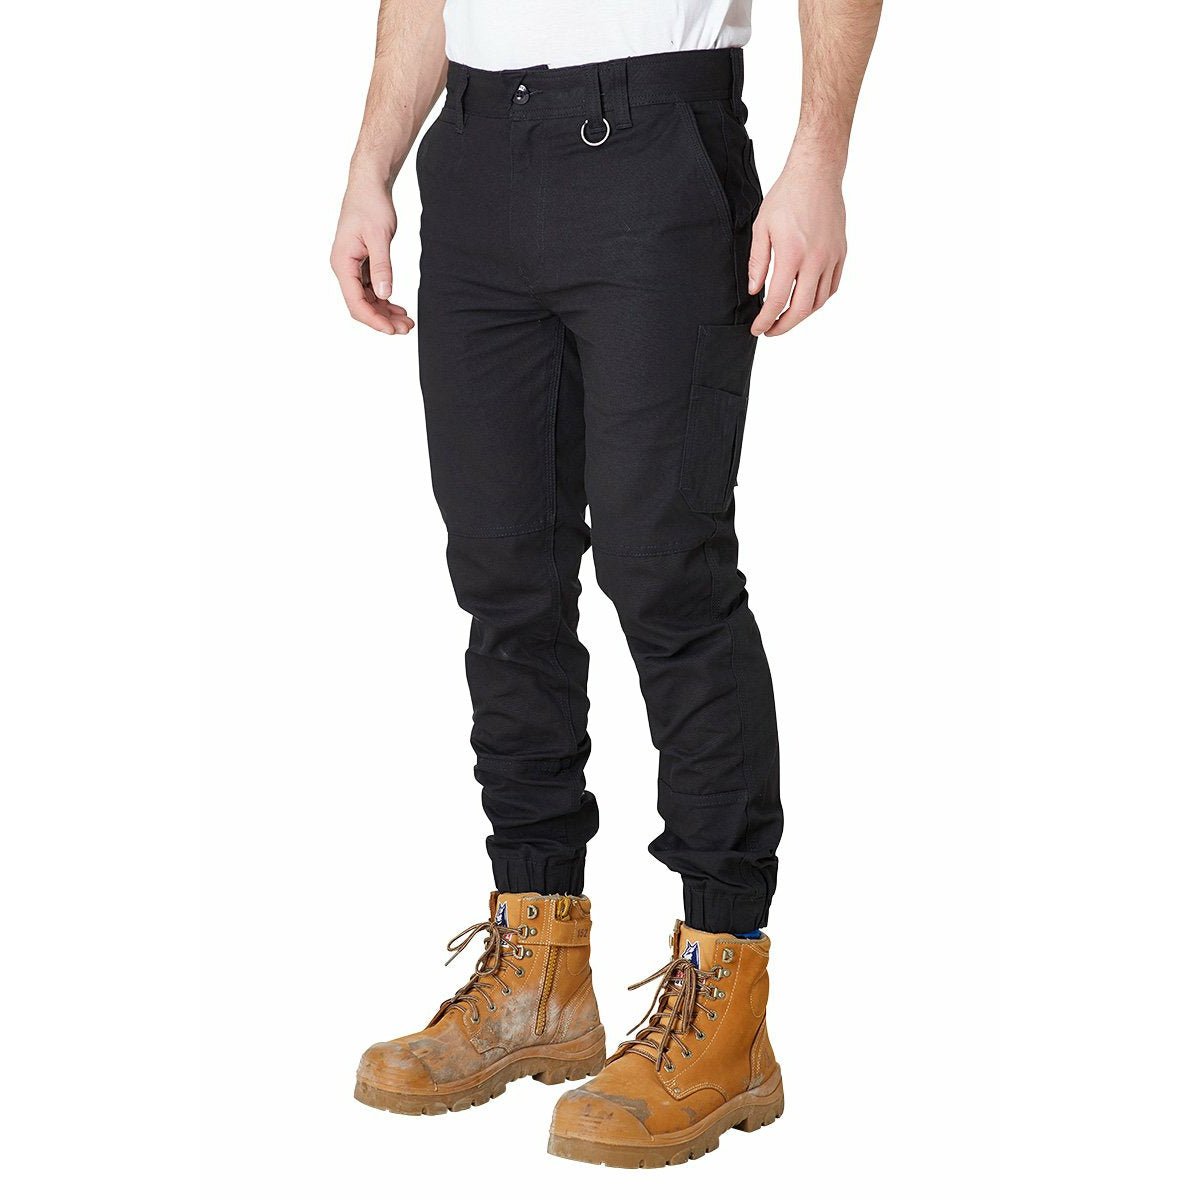 Work Pants Cargo Trousers Tapered Cuff Stretch Cotton Elastic Waist  Tactical Men | eBay